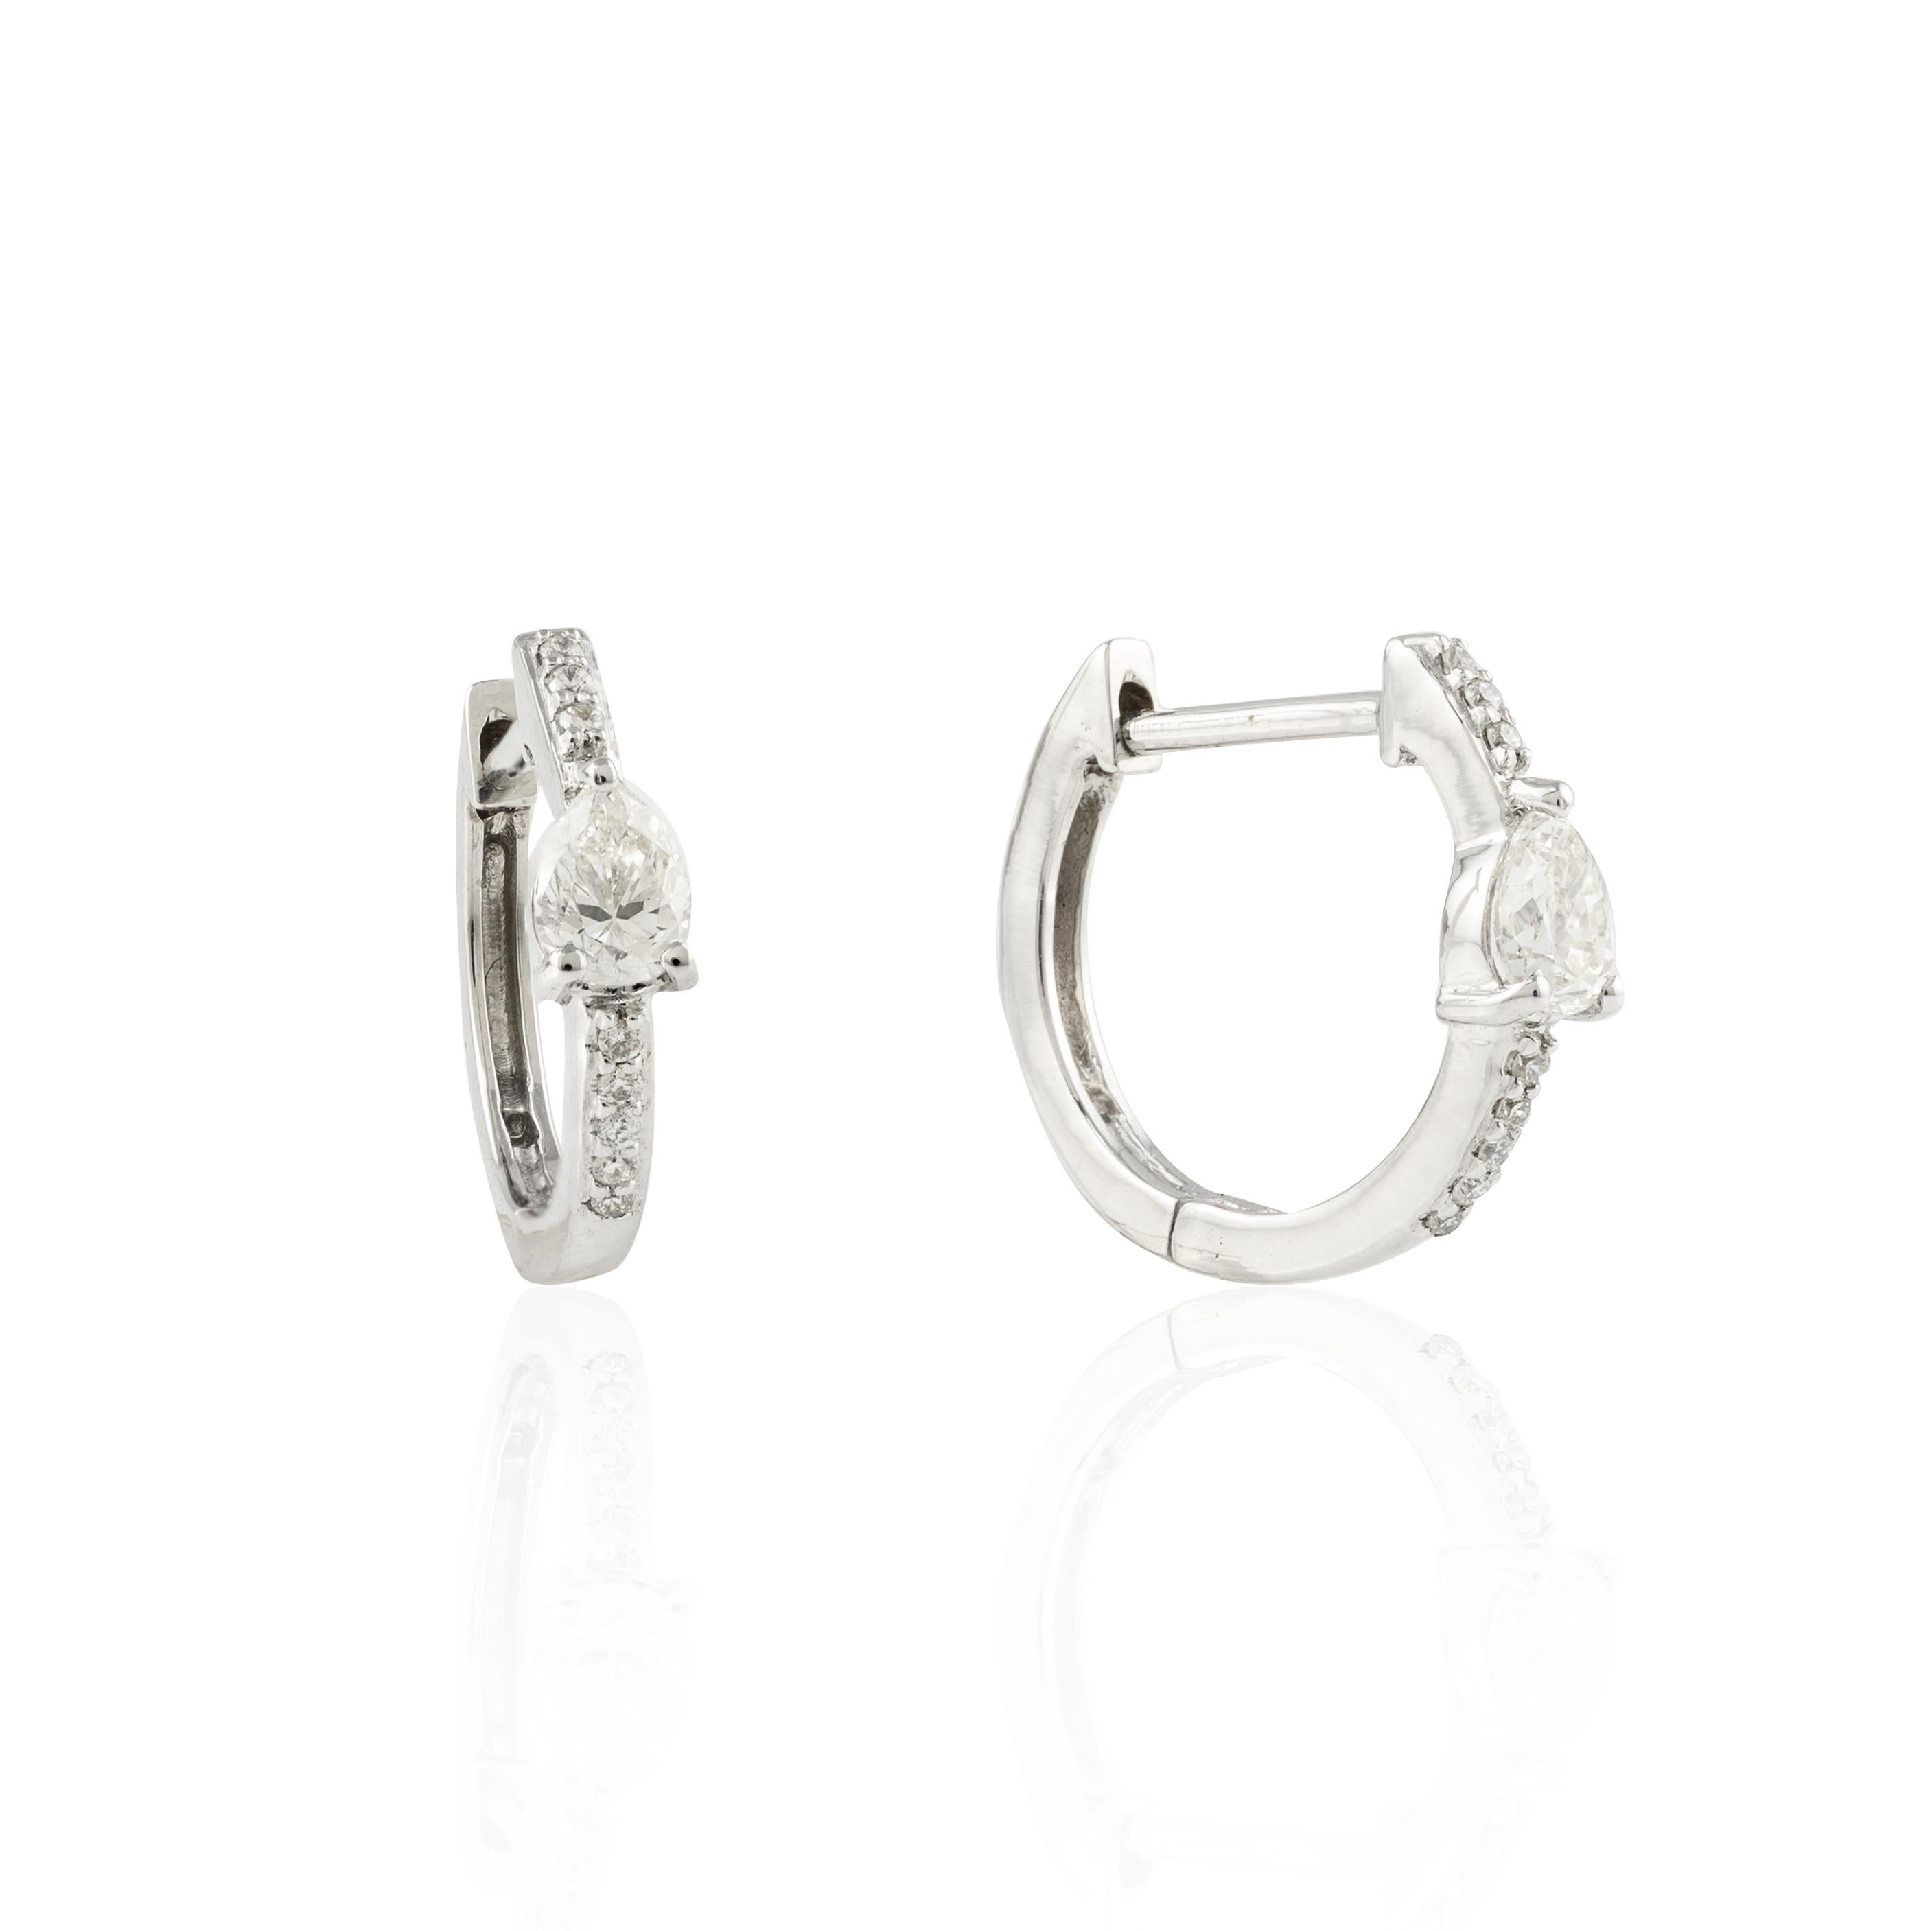 Modernist 18k Solid White Gold Tiny Diamond Huggie Earrings with Pear Diamond in Center For Sale